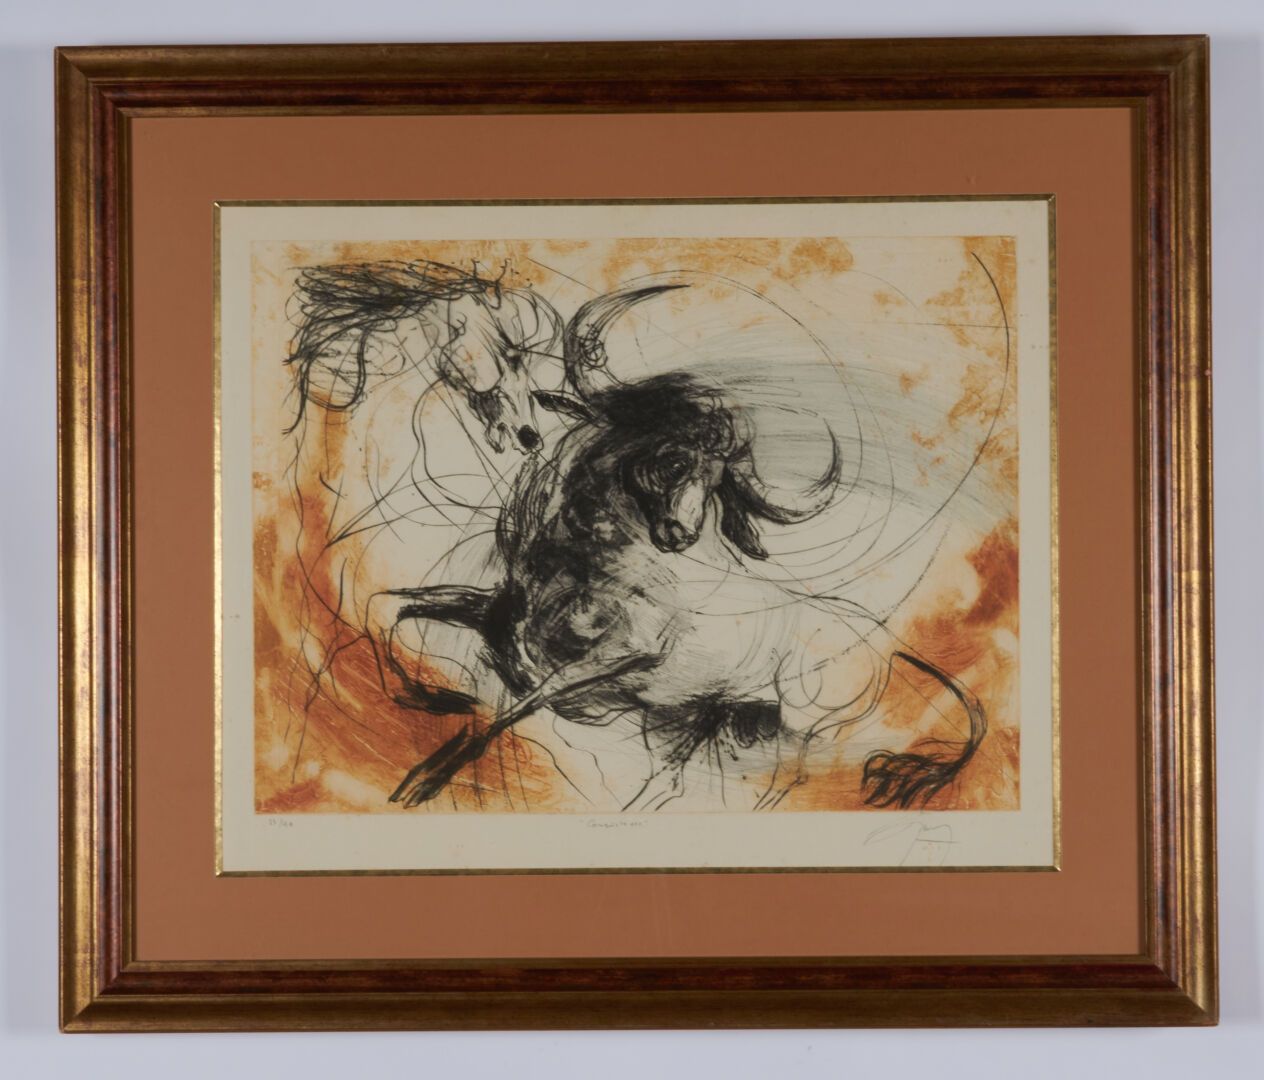 Null GUINY Jean Marie (1954-2010)

"Bull" lithograph - 52x66